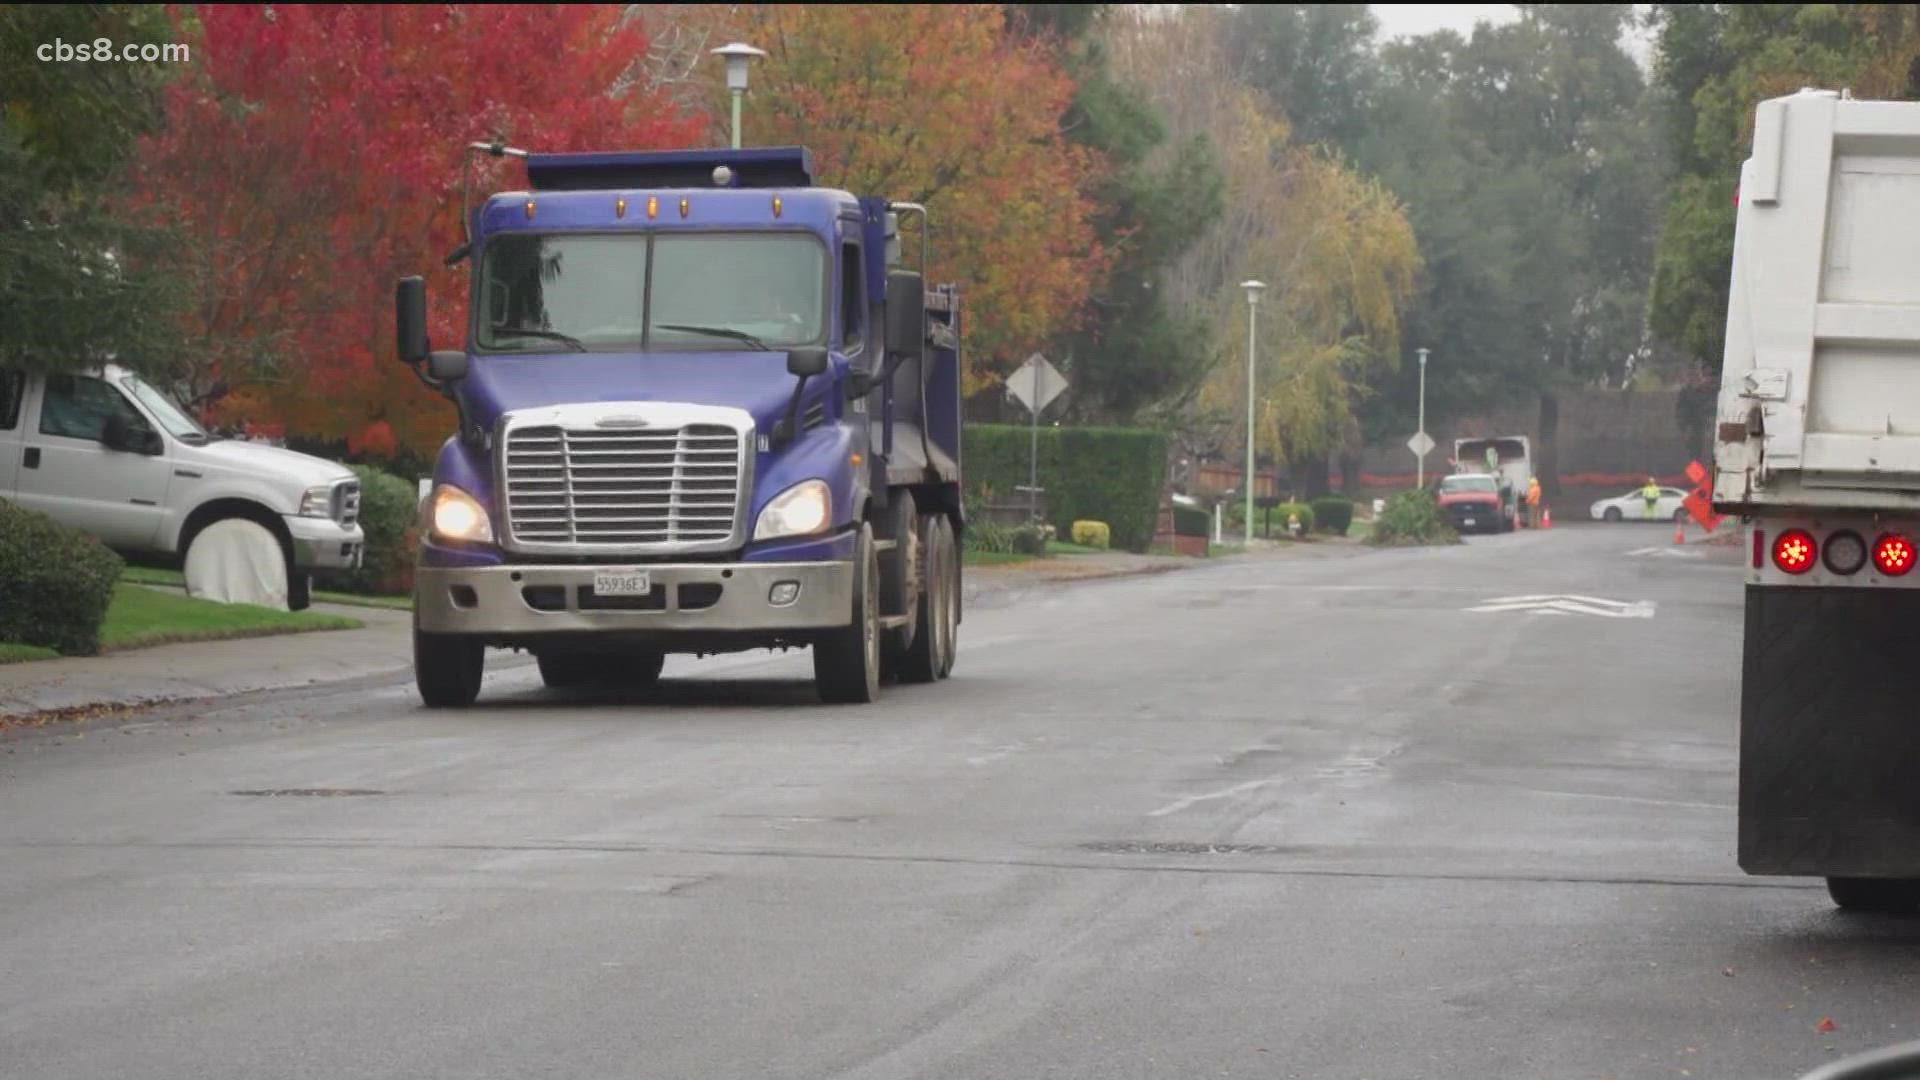 "It takes five seconds for the brakes to even start to work," one truck driver explained.